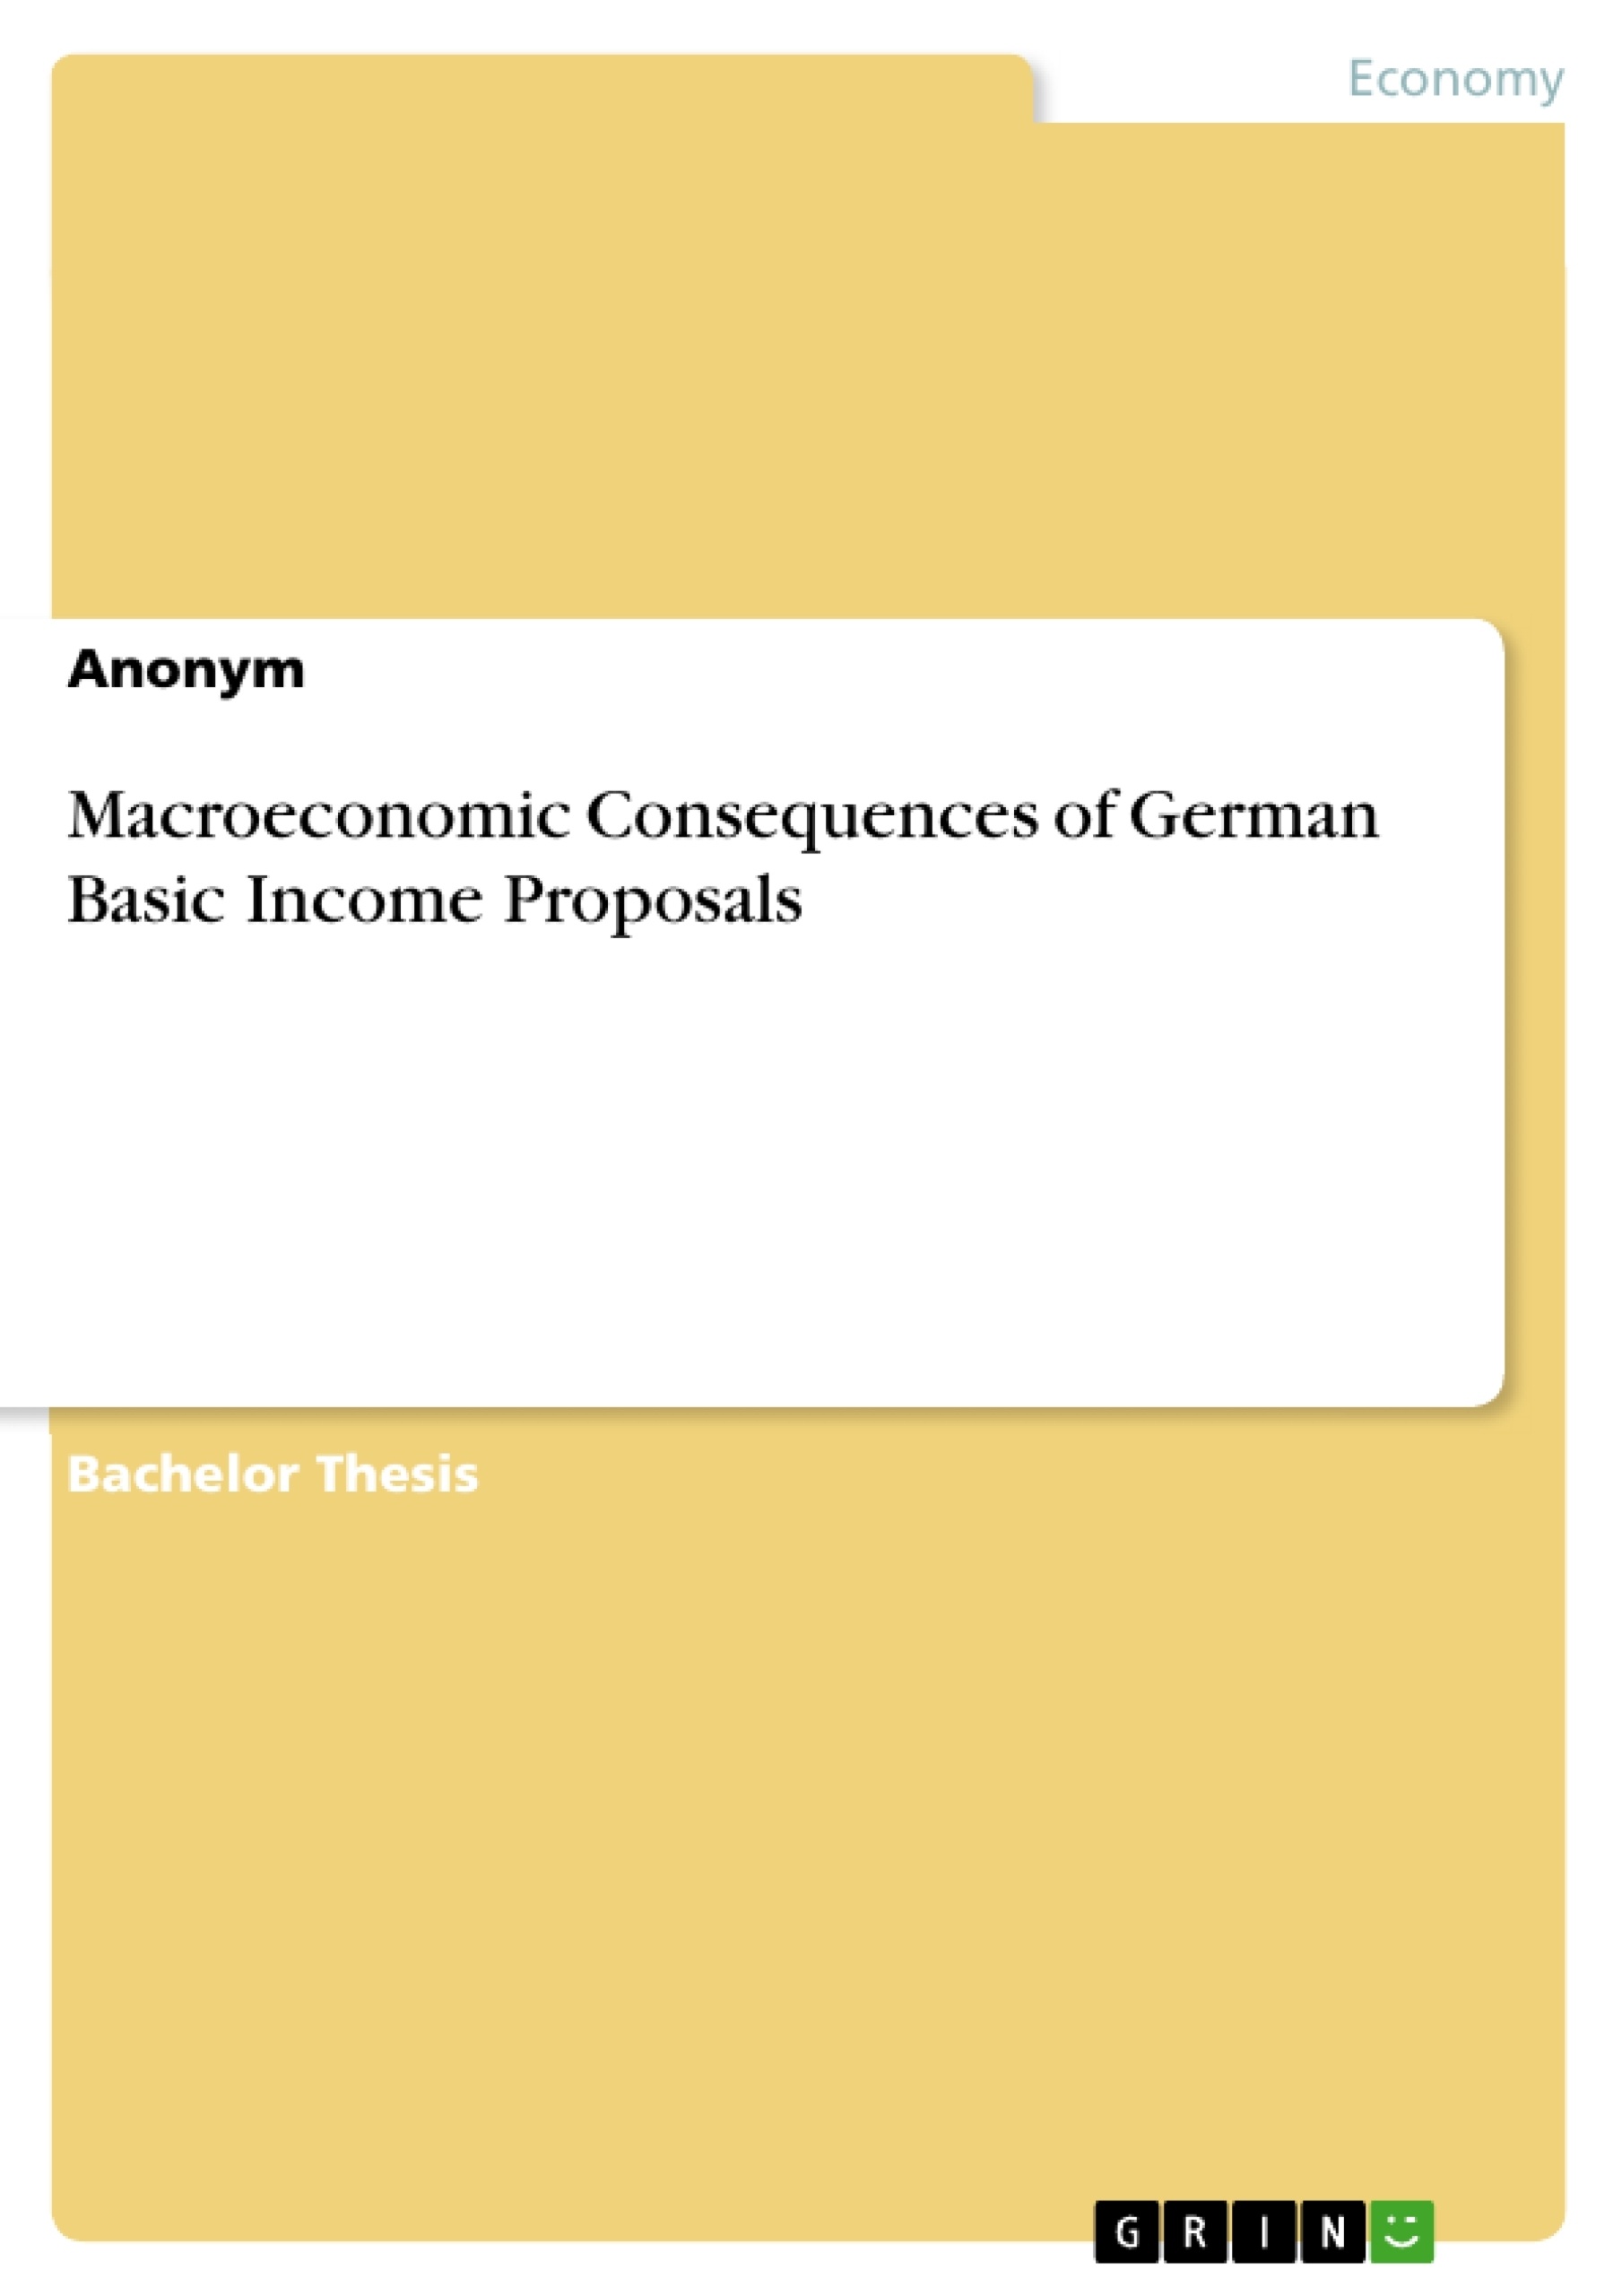 Título: Macroeconomic Consequences of German Basic Income Proposals